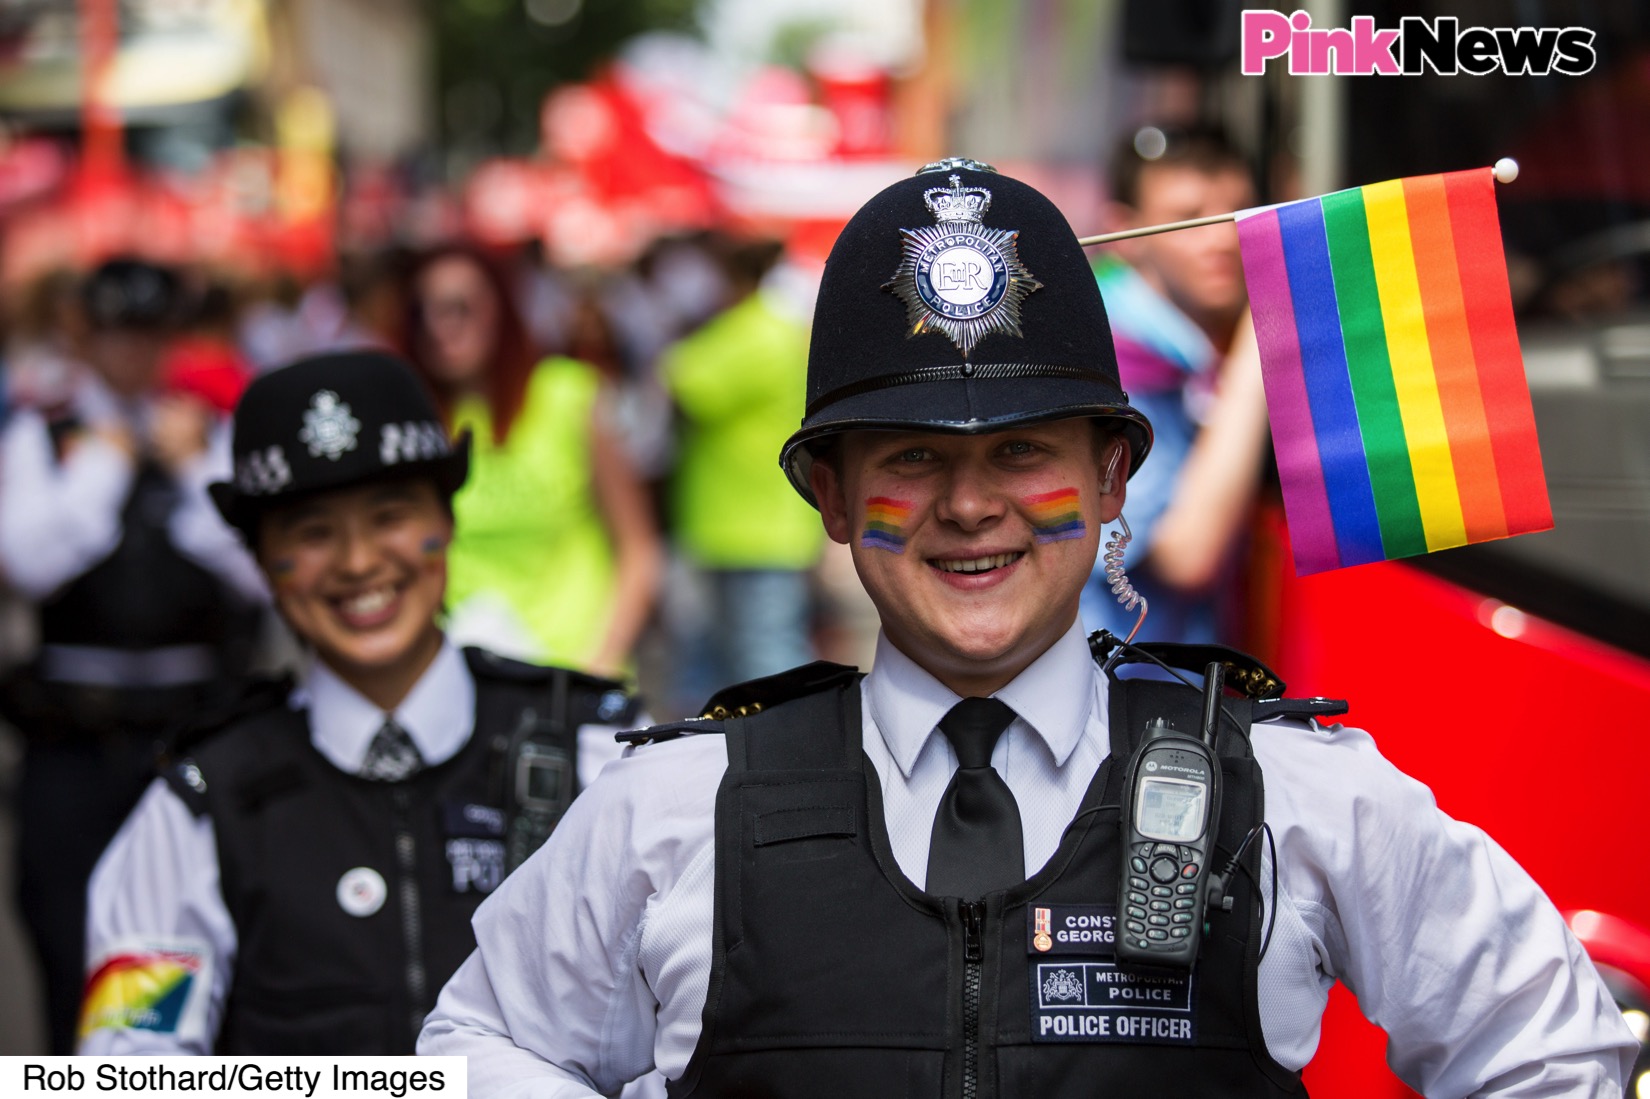 LONDON, ENGLAND - JUNE 27: Police officers take part in the annual Pride in London Parade on June 27, 2015 in London, England. Pride in London is one of the world's biggest LGBT+ celebrations as thousands of people take part in a parade and attend performances at various locations across the city. (Photo by Rob Stothard/Getty Images)